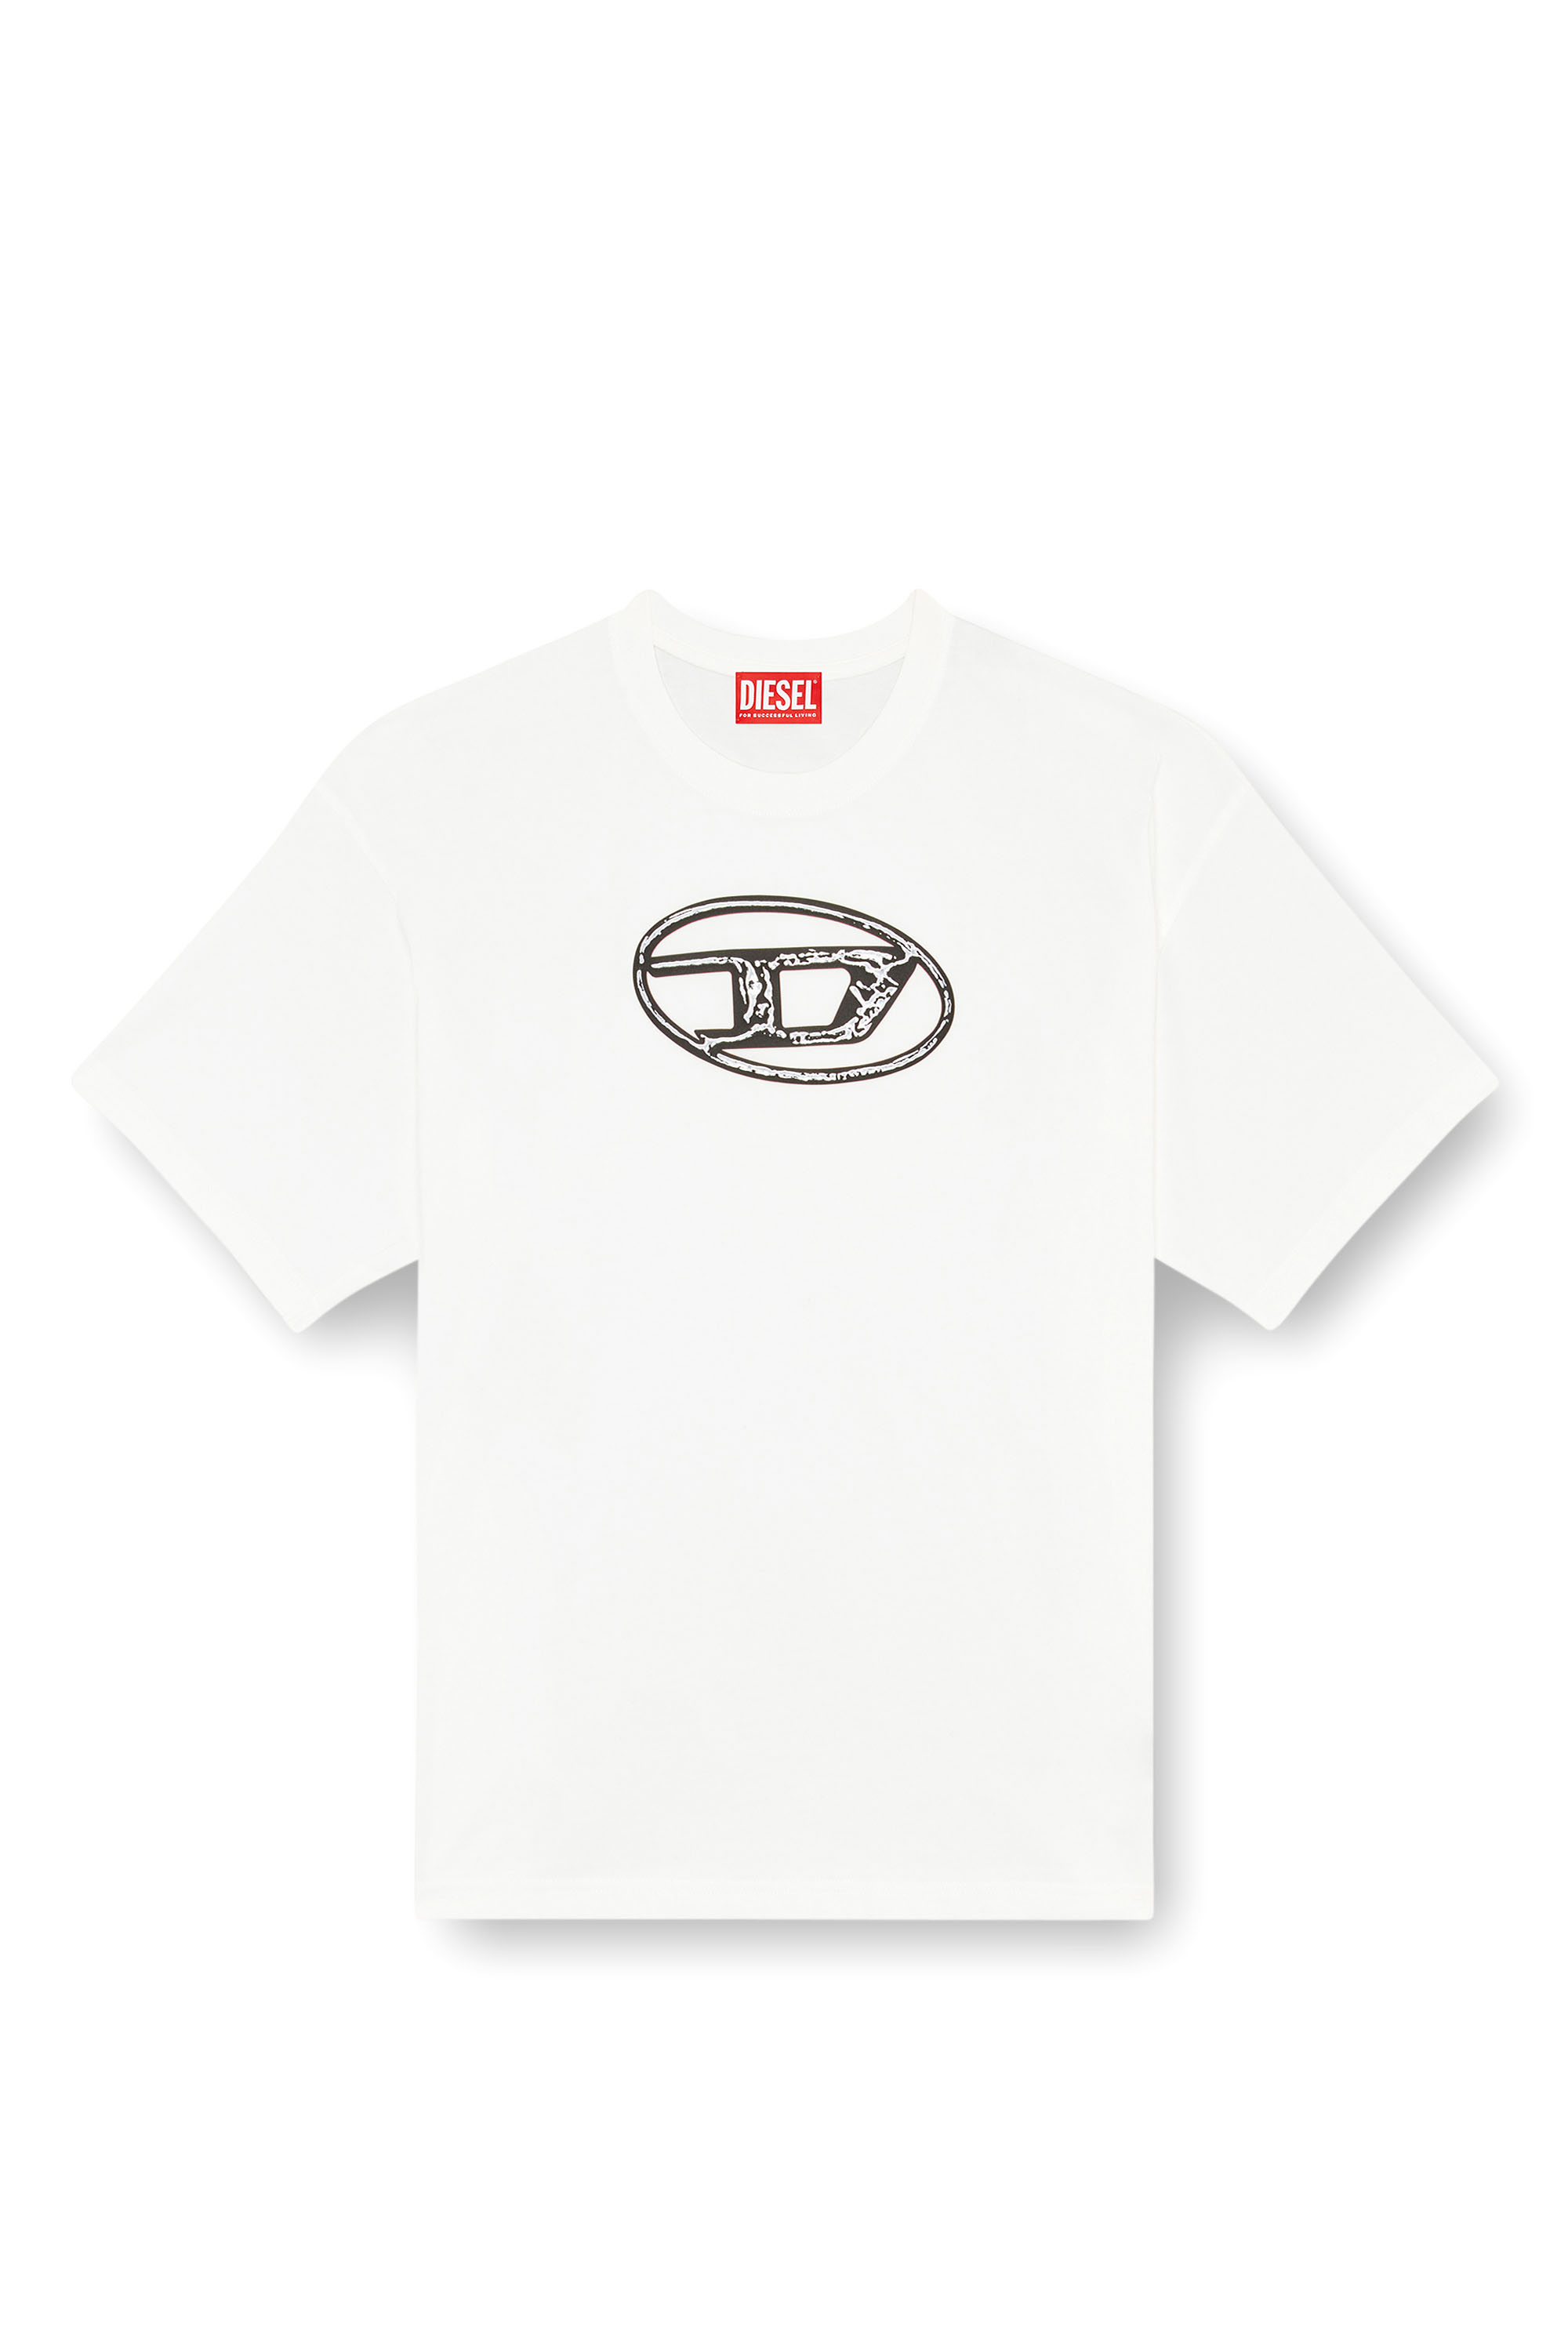 Diesel - T-BOXT-Q22, Man Faded T-shirt with Oval D print in White - Image 4